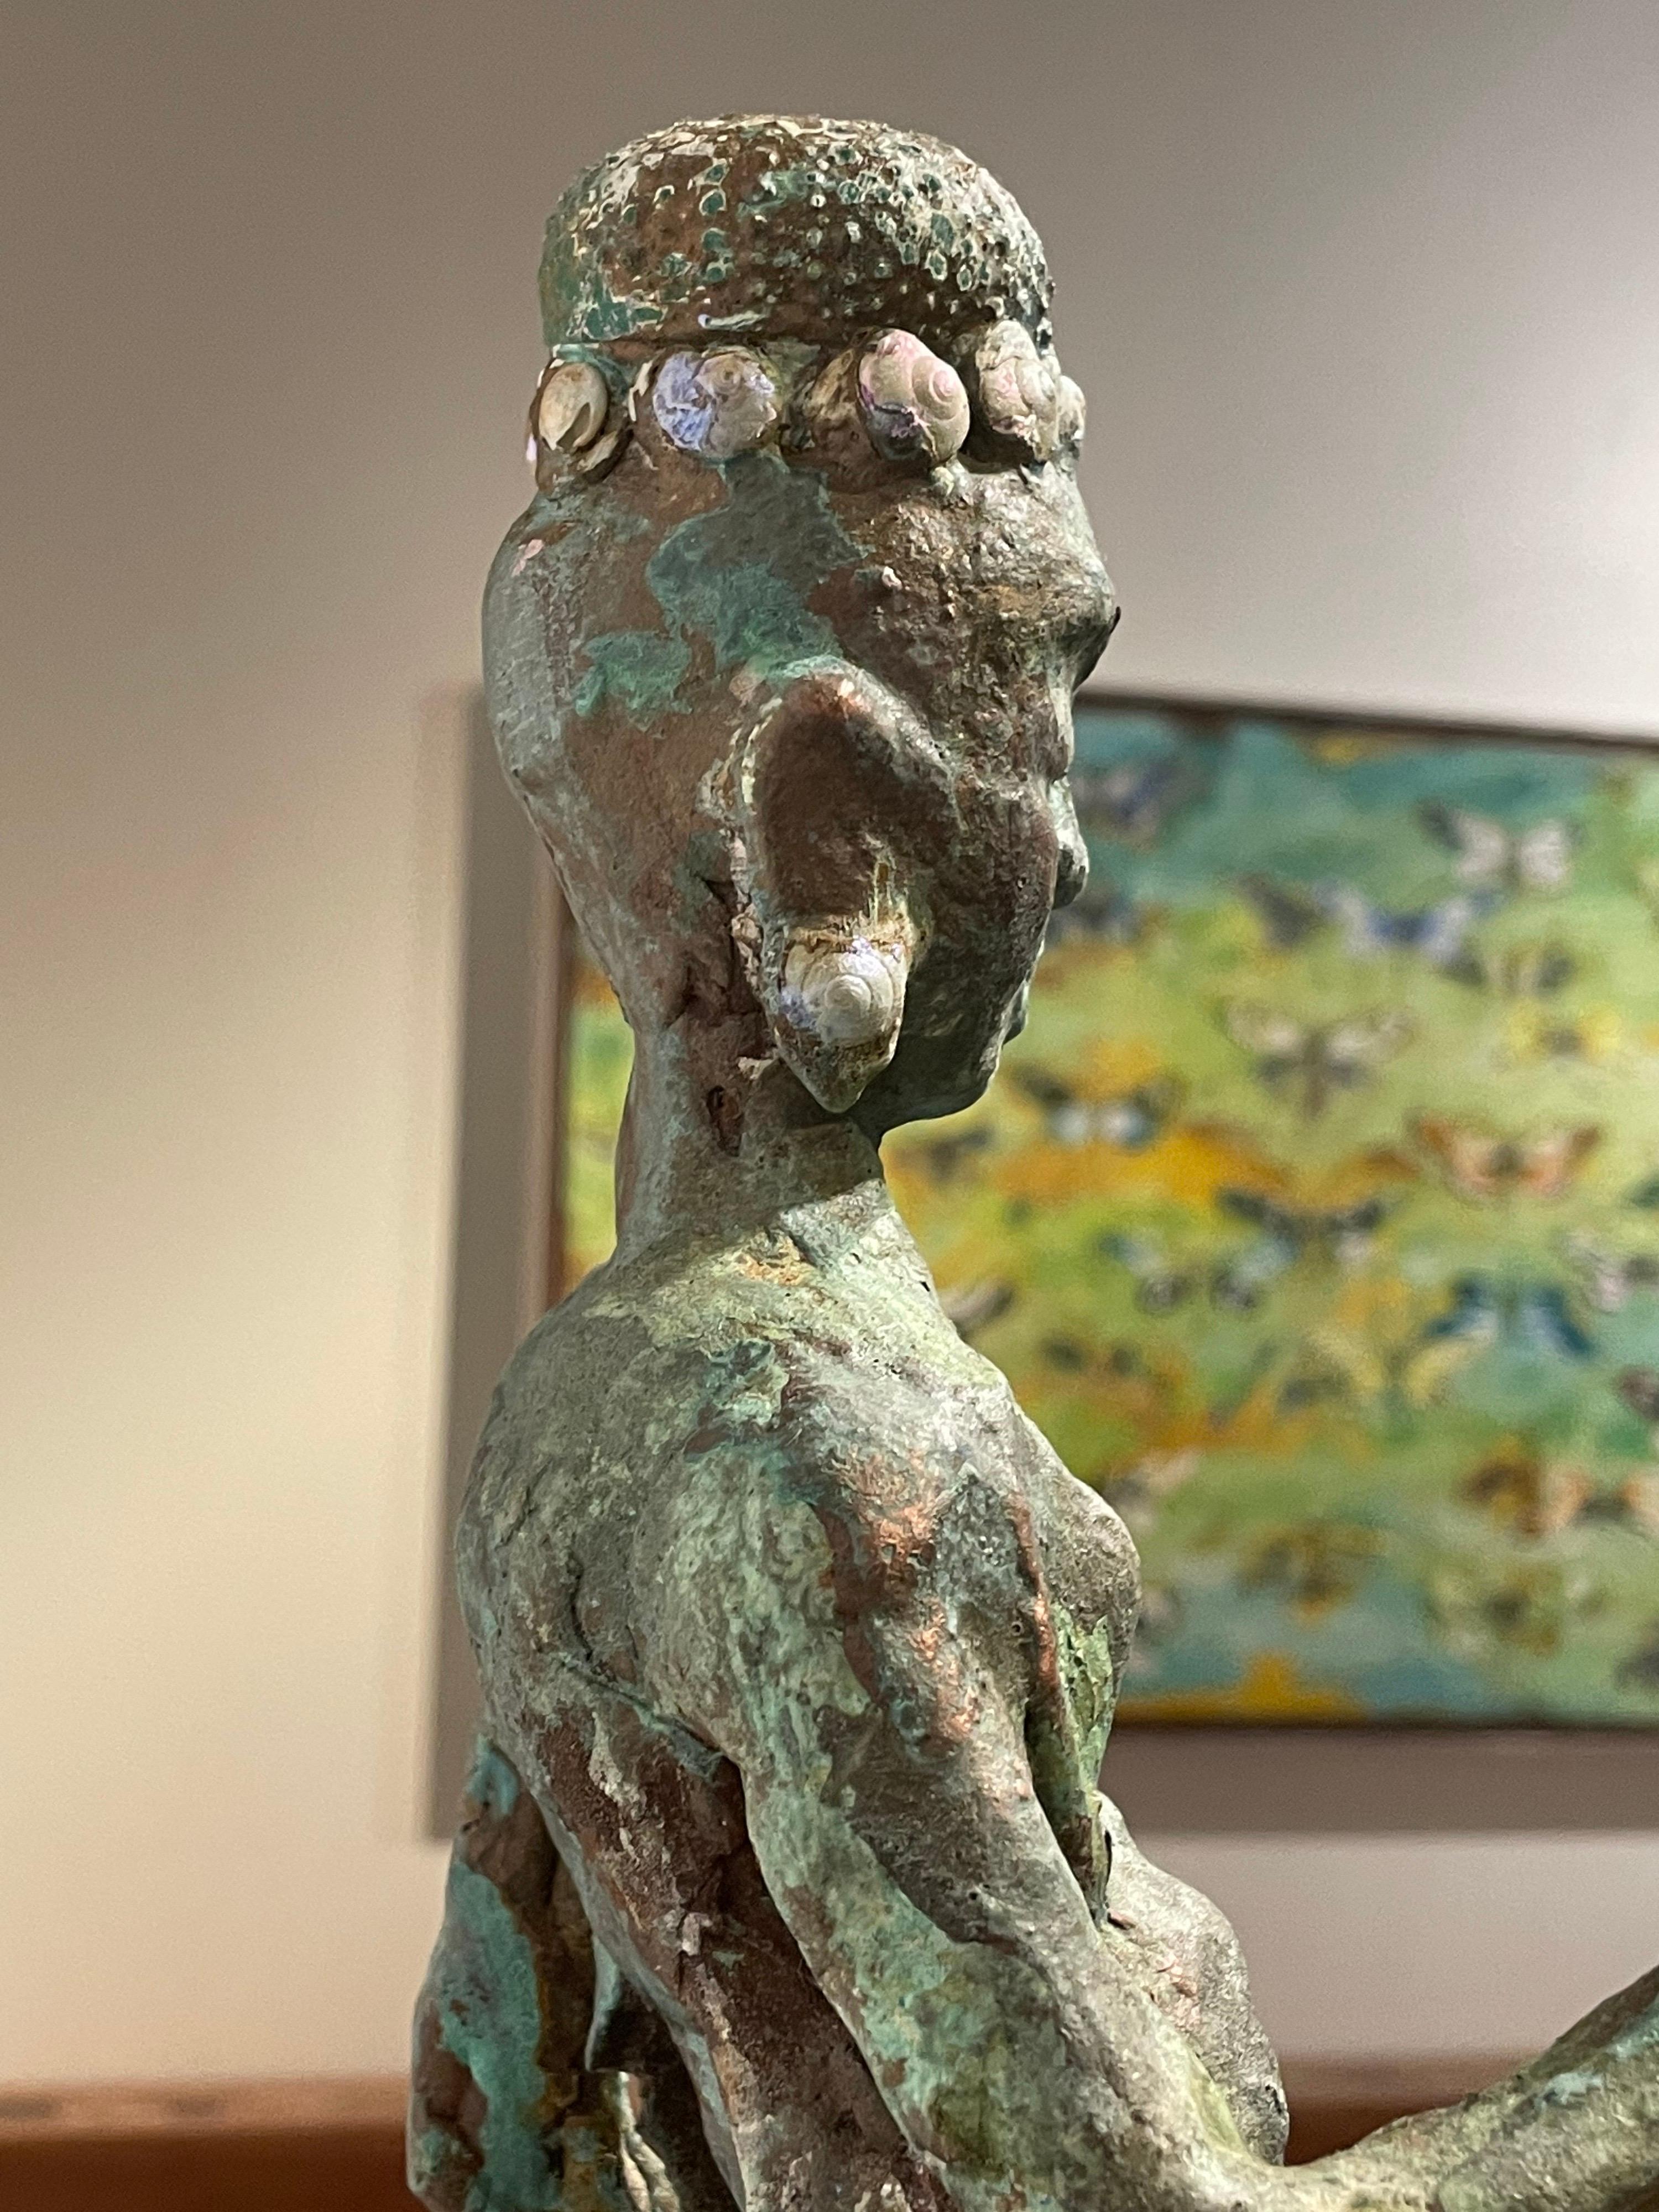 Sea Goddess, a metal and acrylic paint sculpture by artists Chris Reilly. Reilly, when not painting assembles one of a kind sculptures that leave viewers wondering how far his imagination stretches.